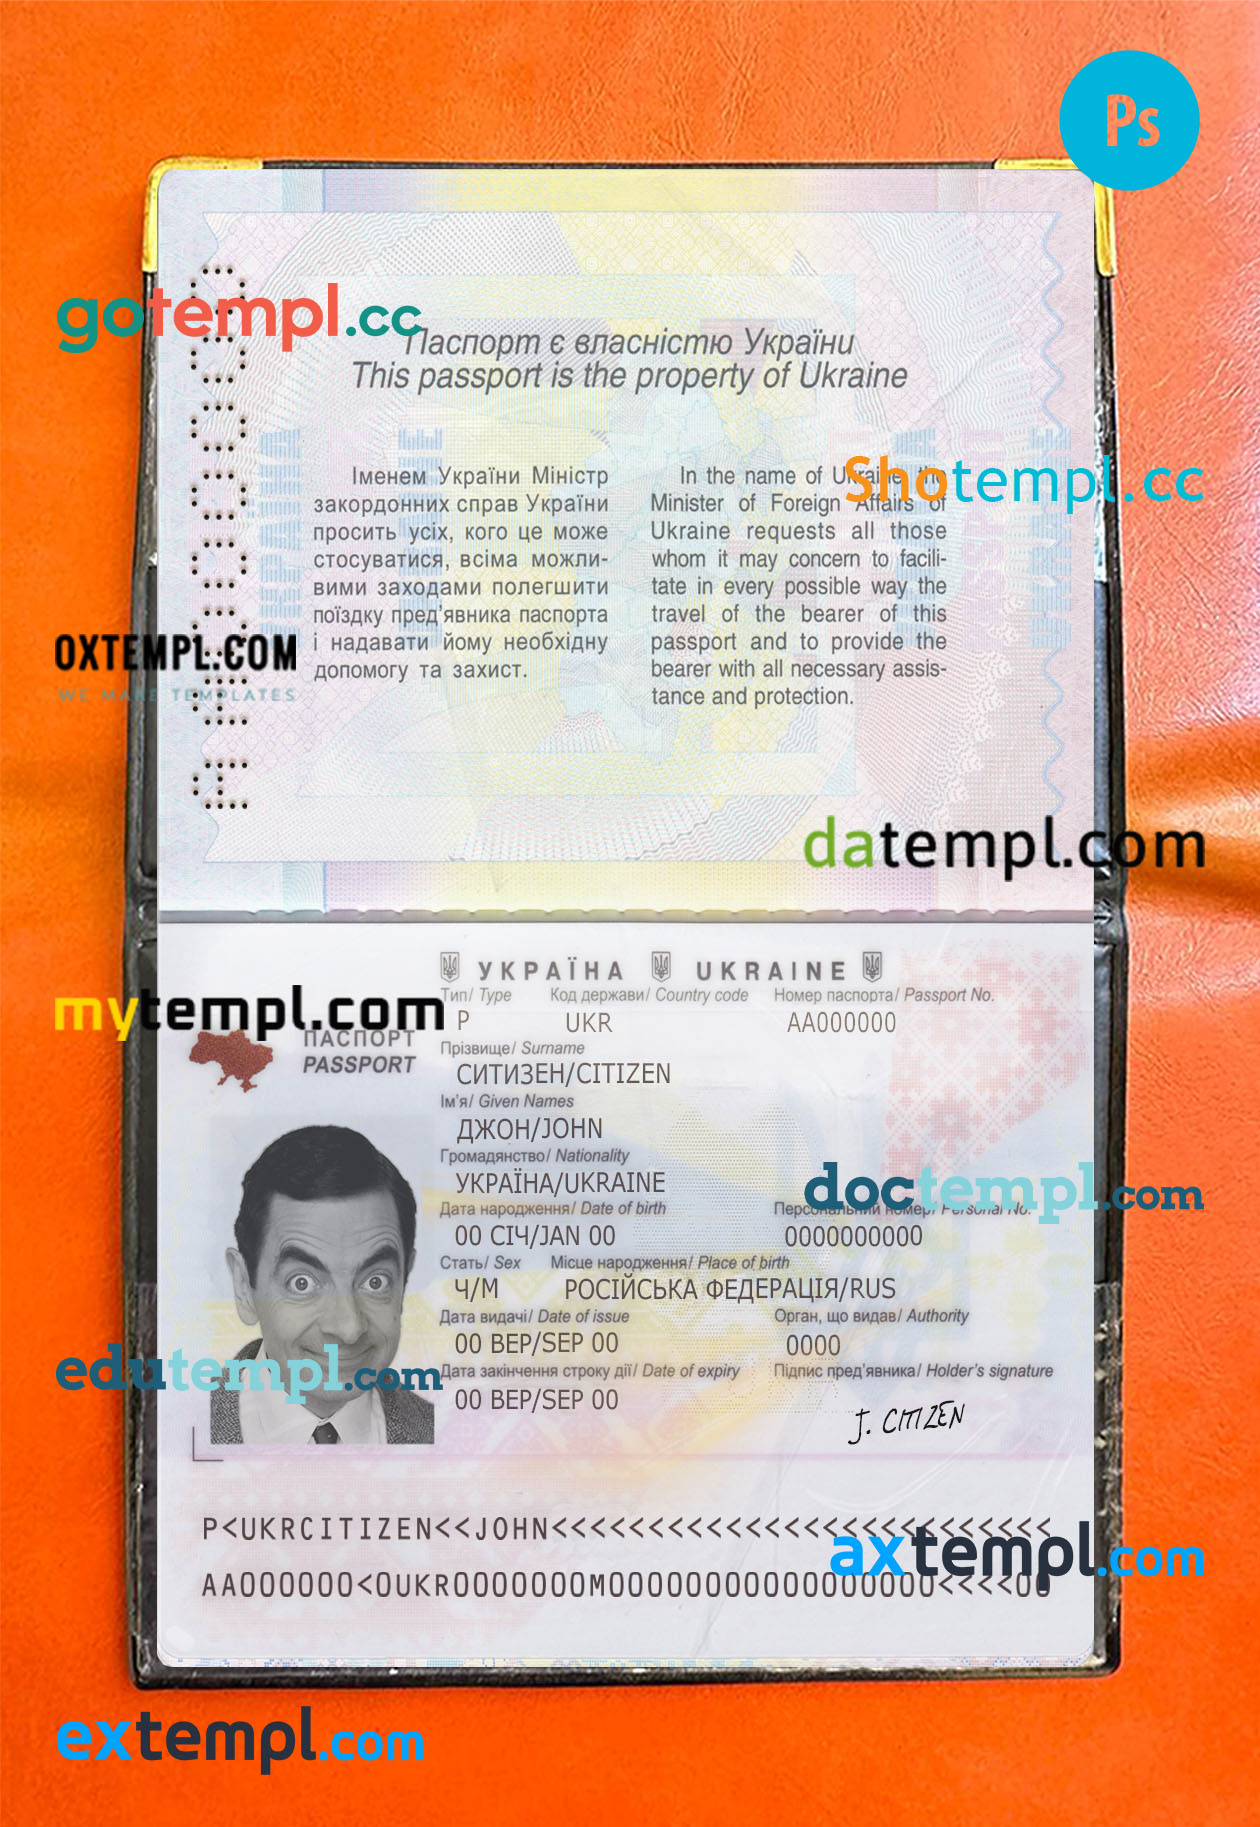 Russia electronic visa PSD template, with fonts